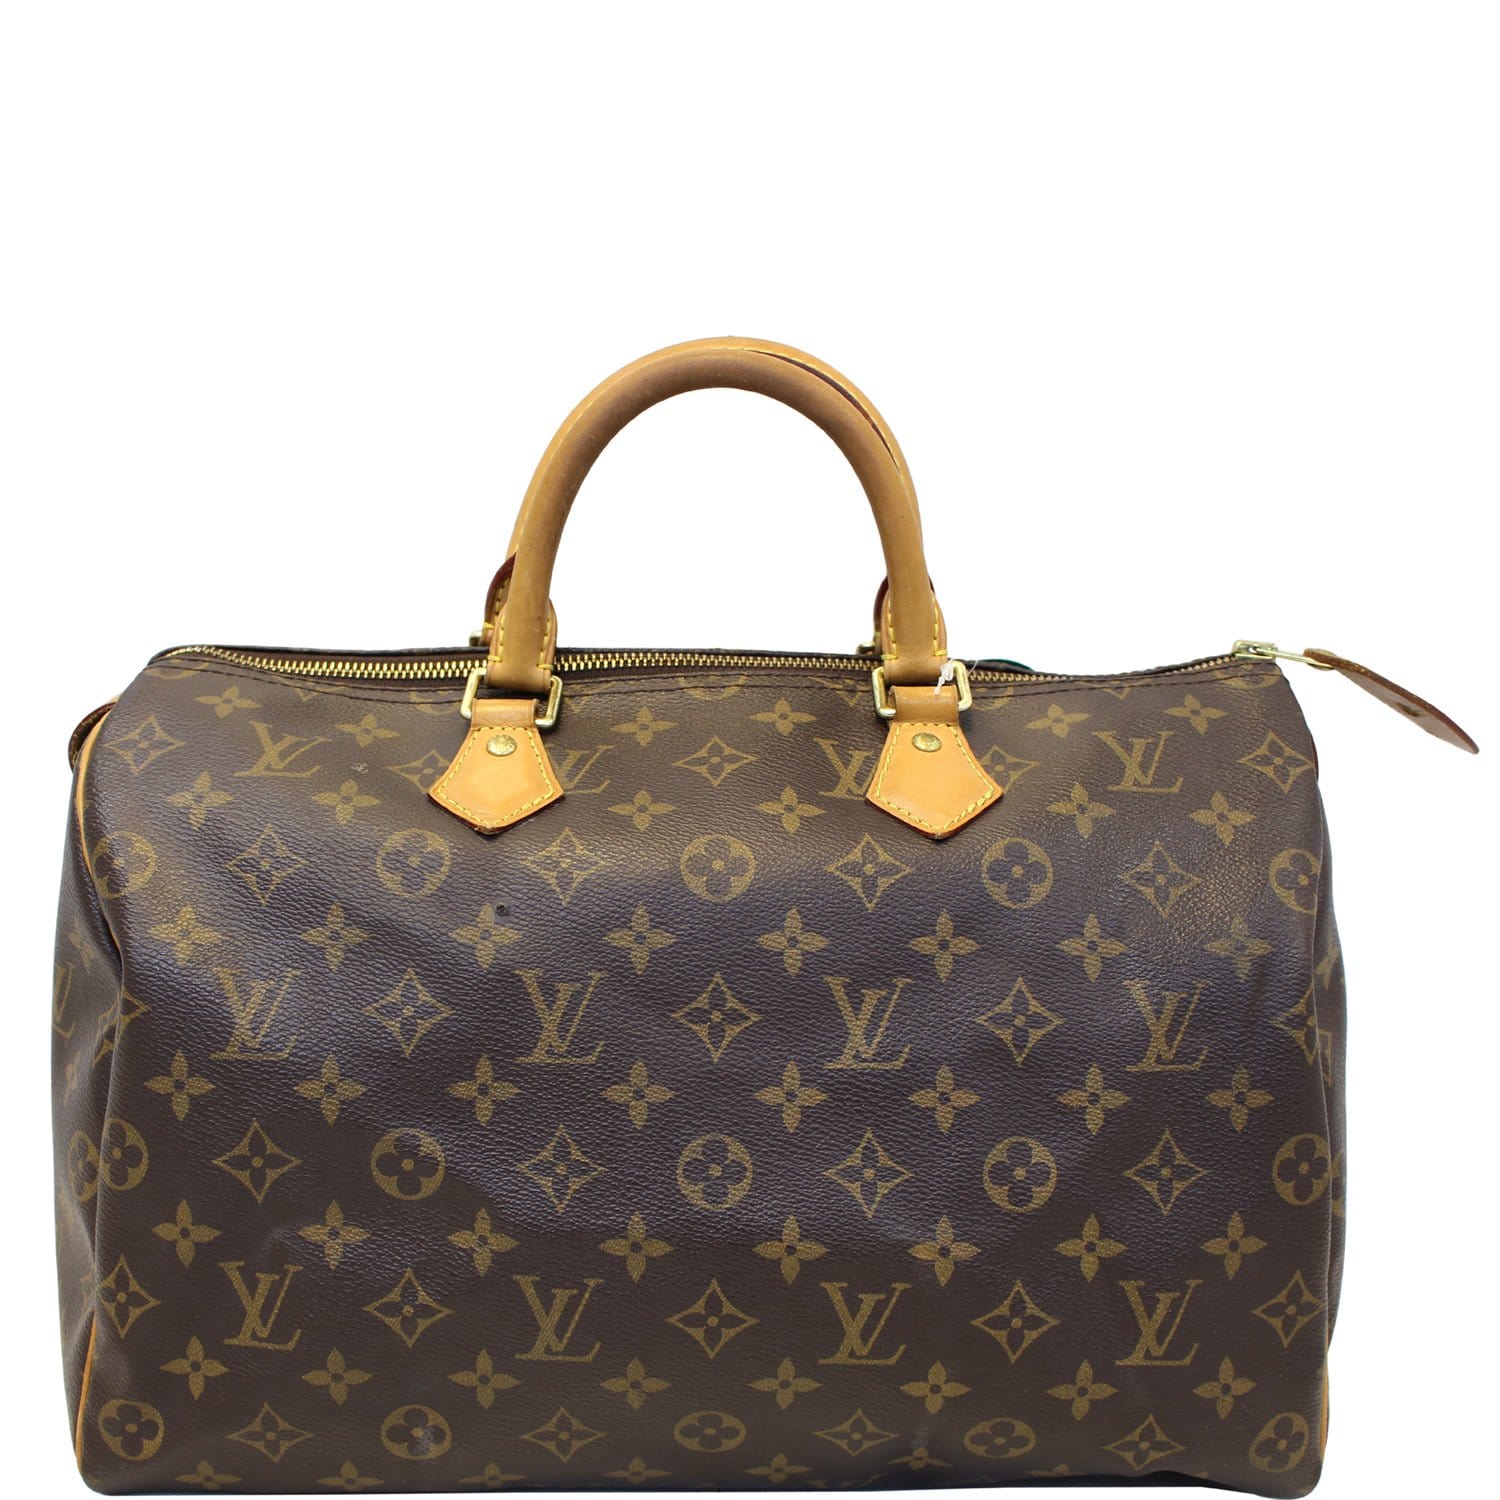 ON SALE* LOUIS VUITTON #40228 Monogram Canvas Speedy 35 – ALL YOUR BLISS